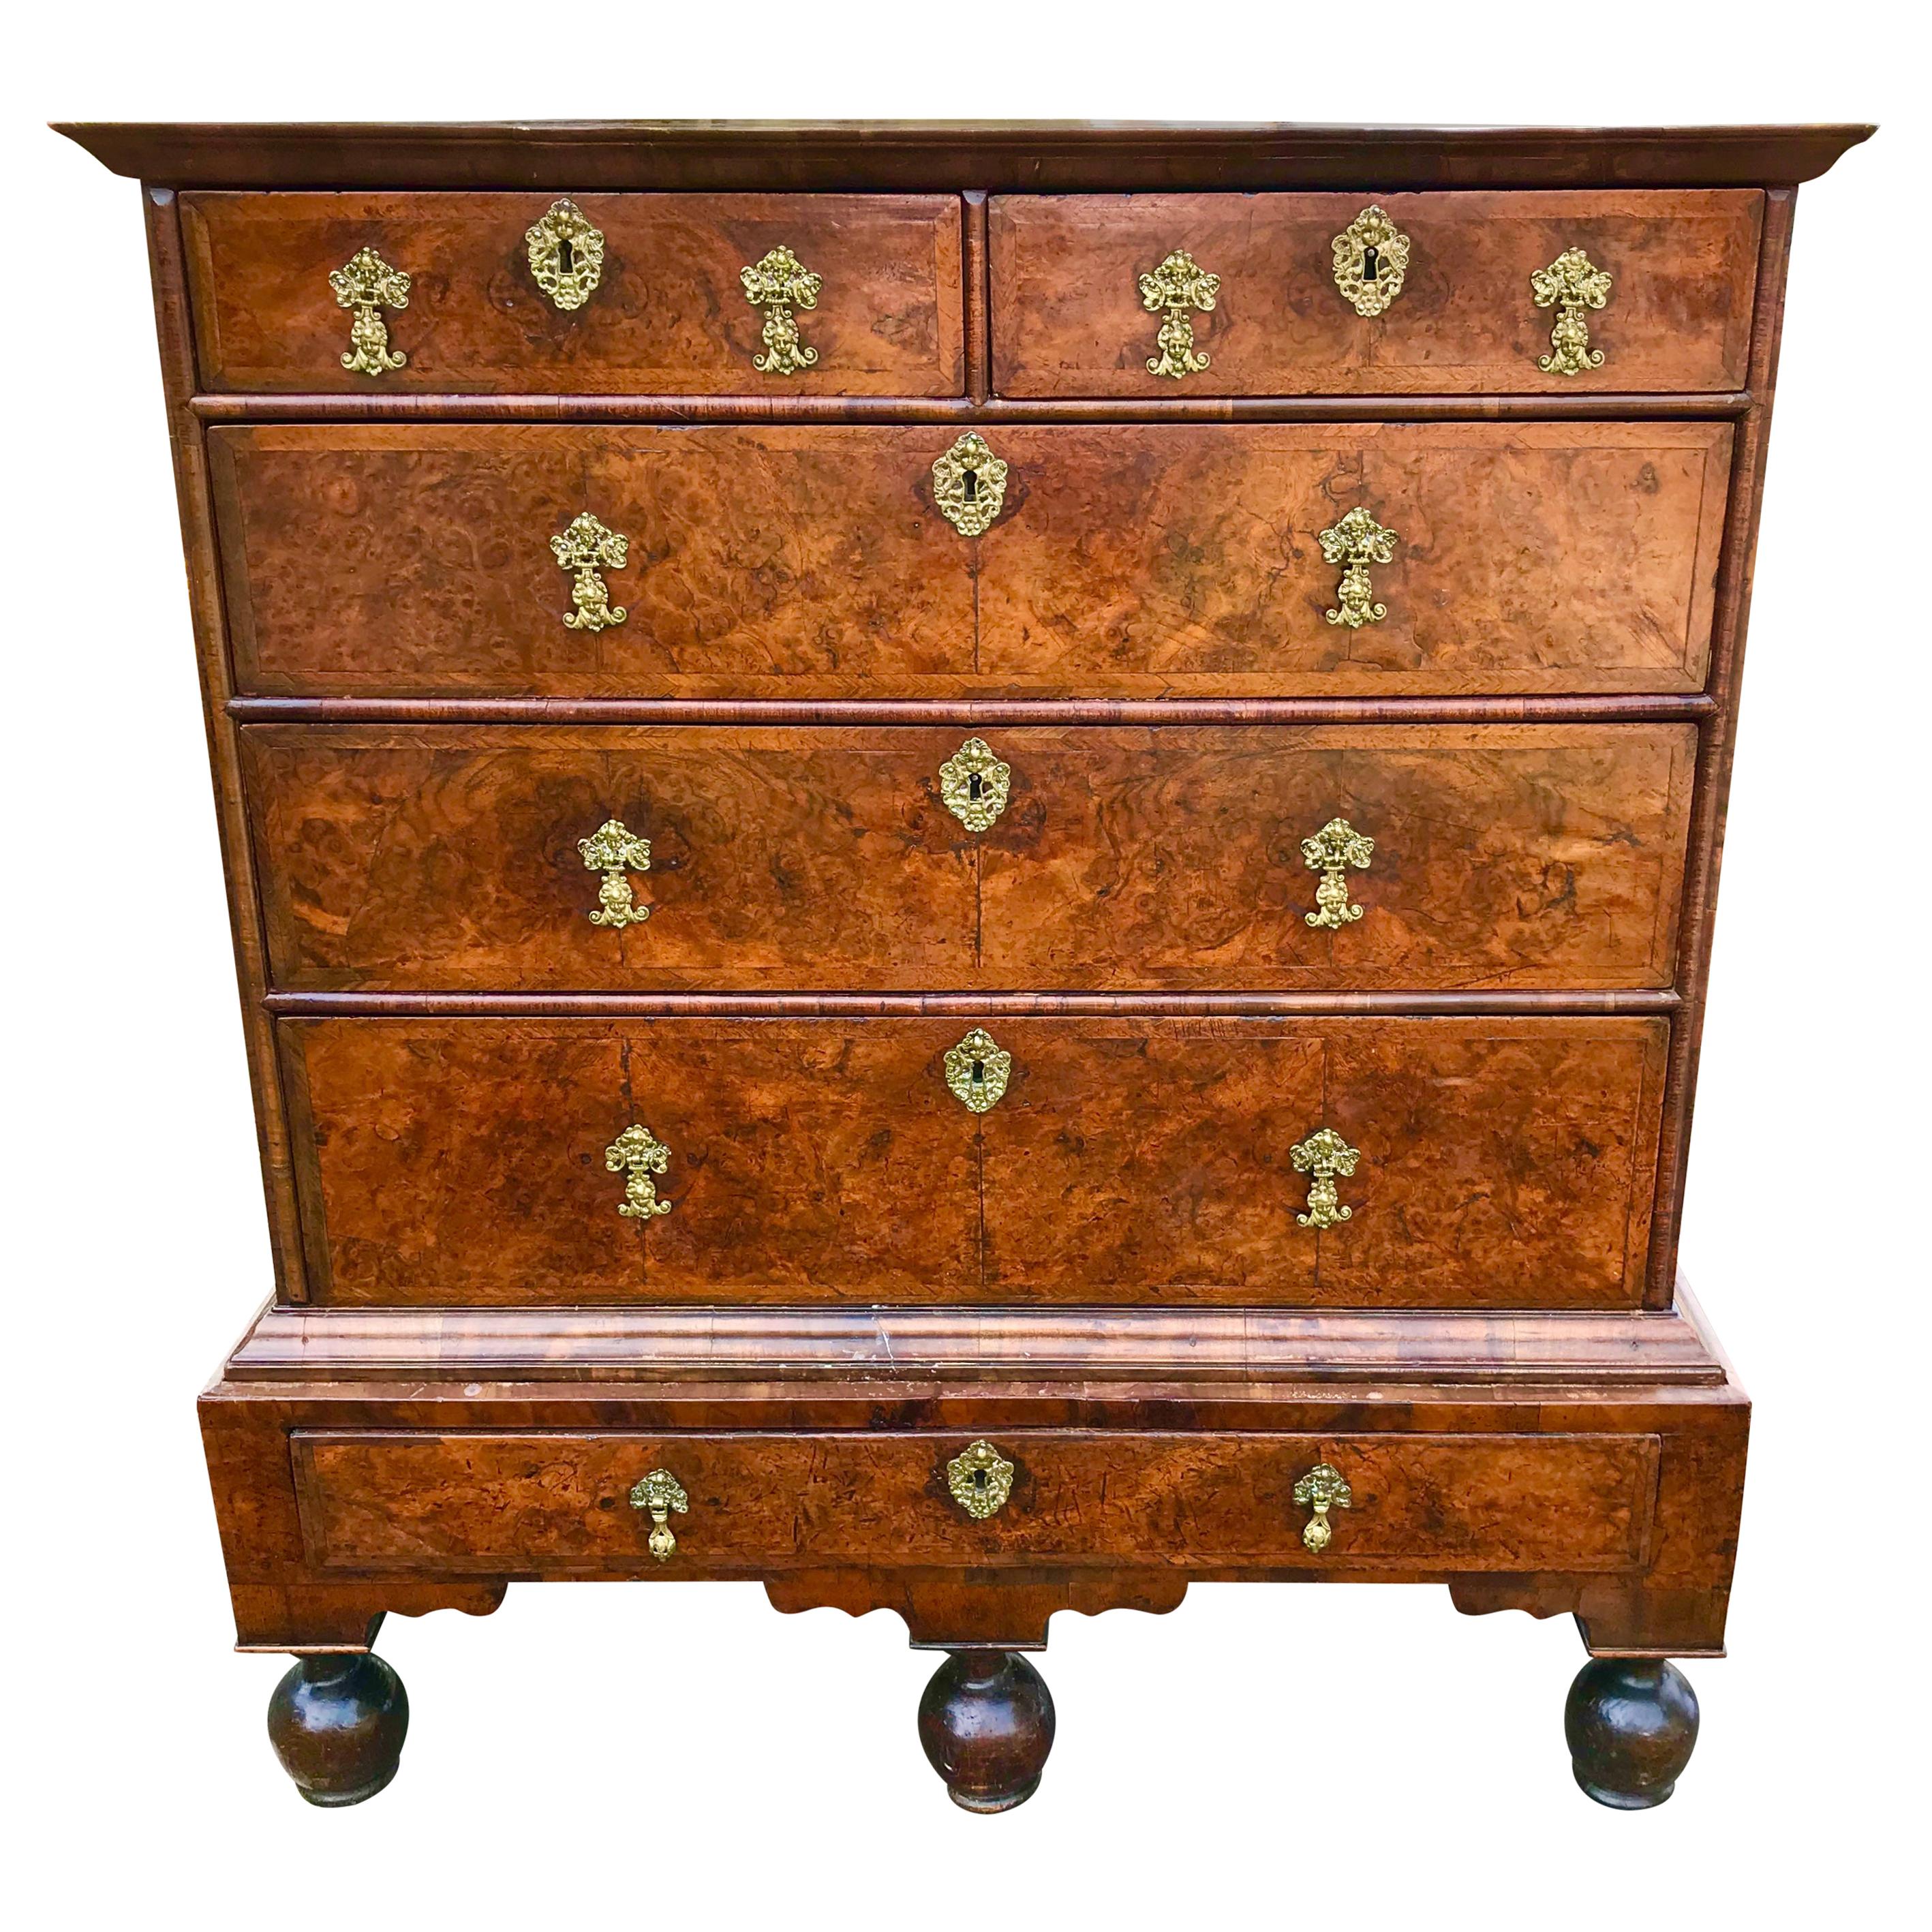 Queen Anne transitional to George I Burr and Figured Walnut Chest on Stand